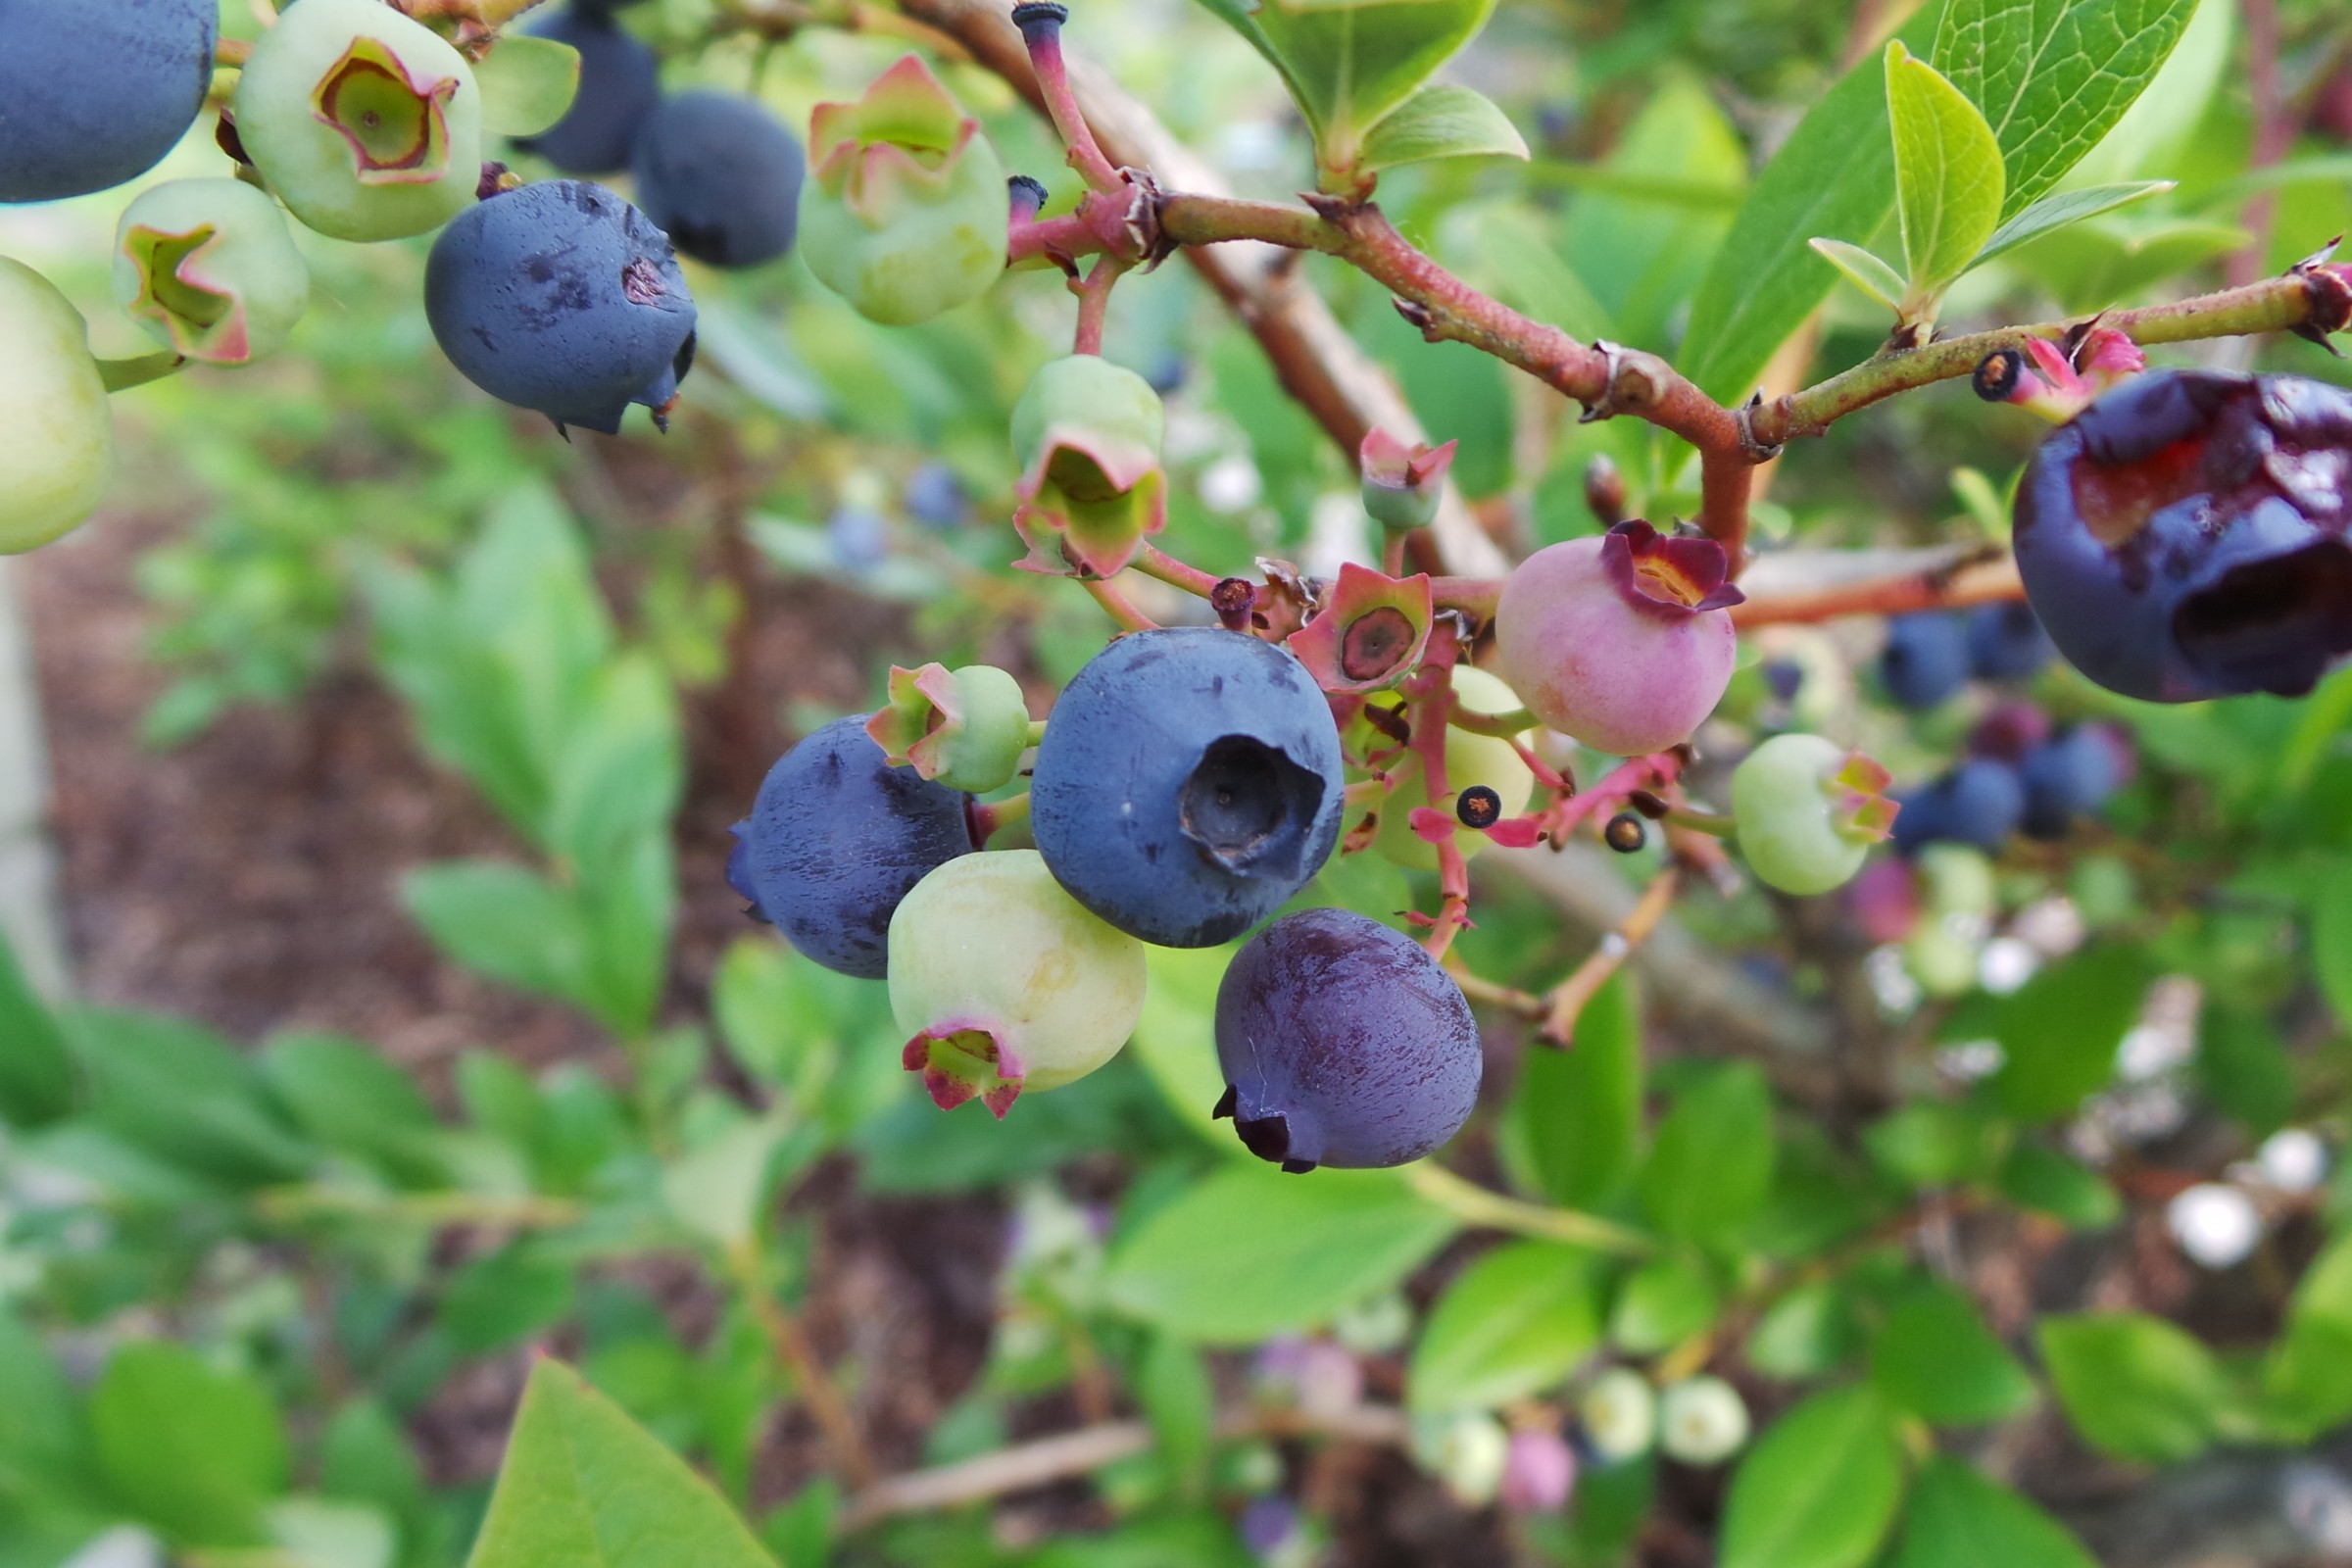 image of blueberries on the plant